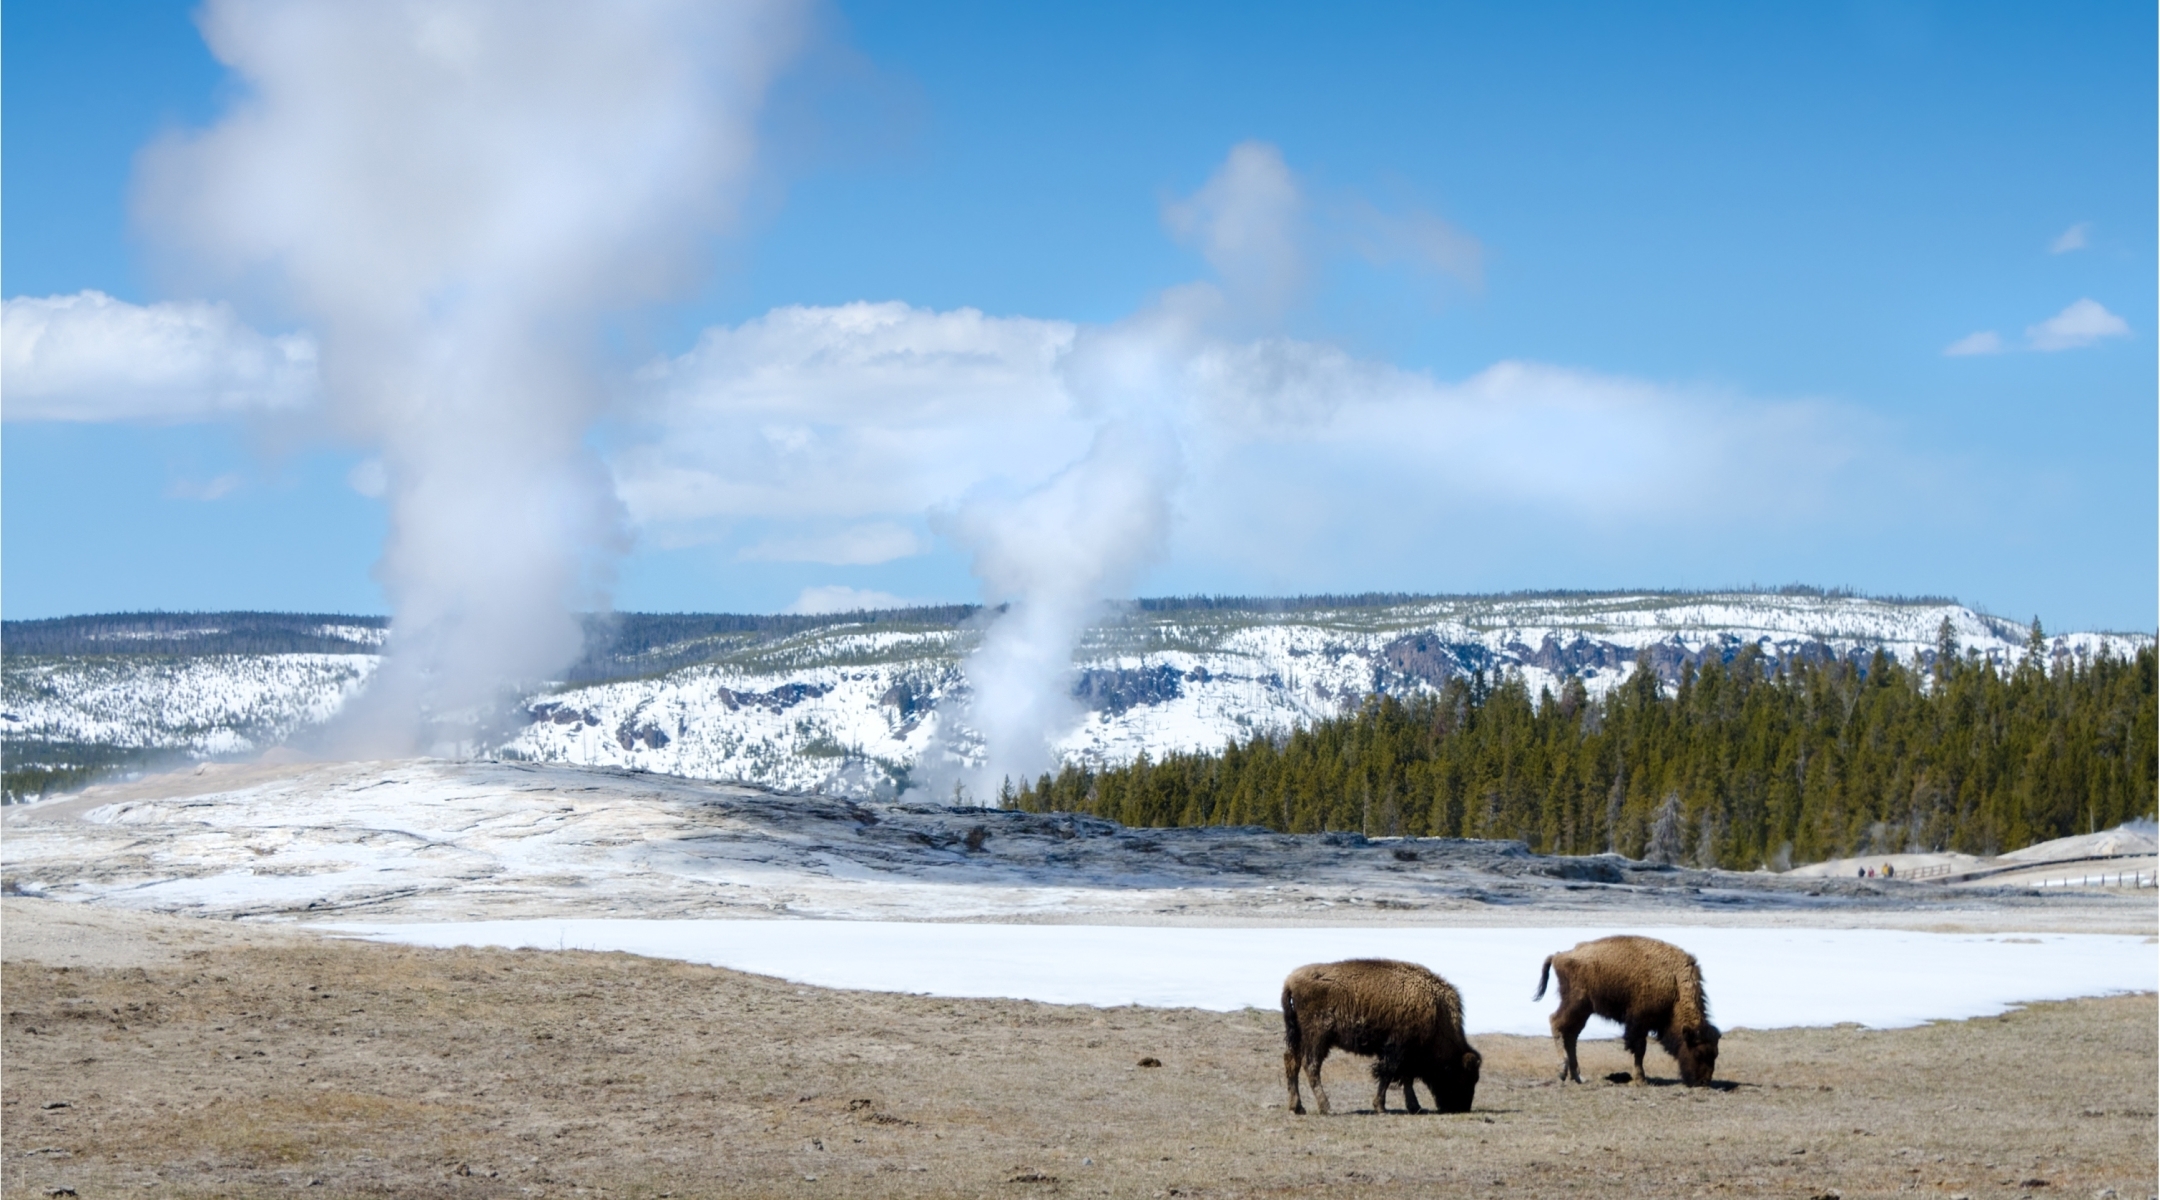 View of geysers and buffalo in a valley in Wyoming